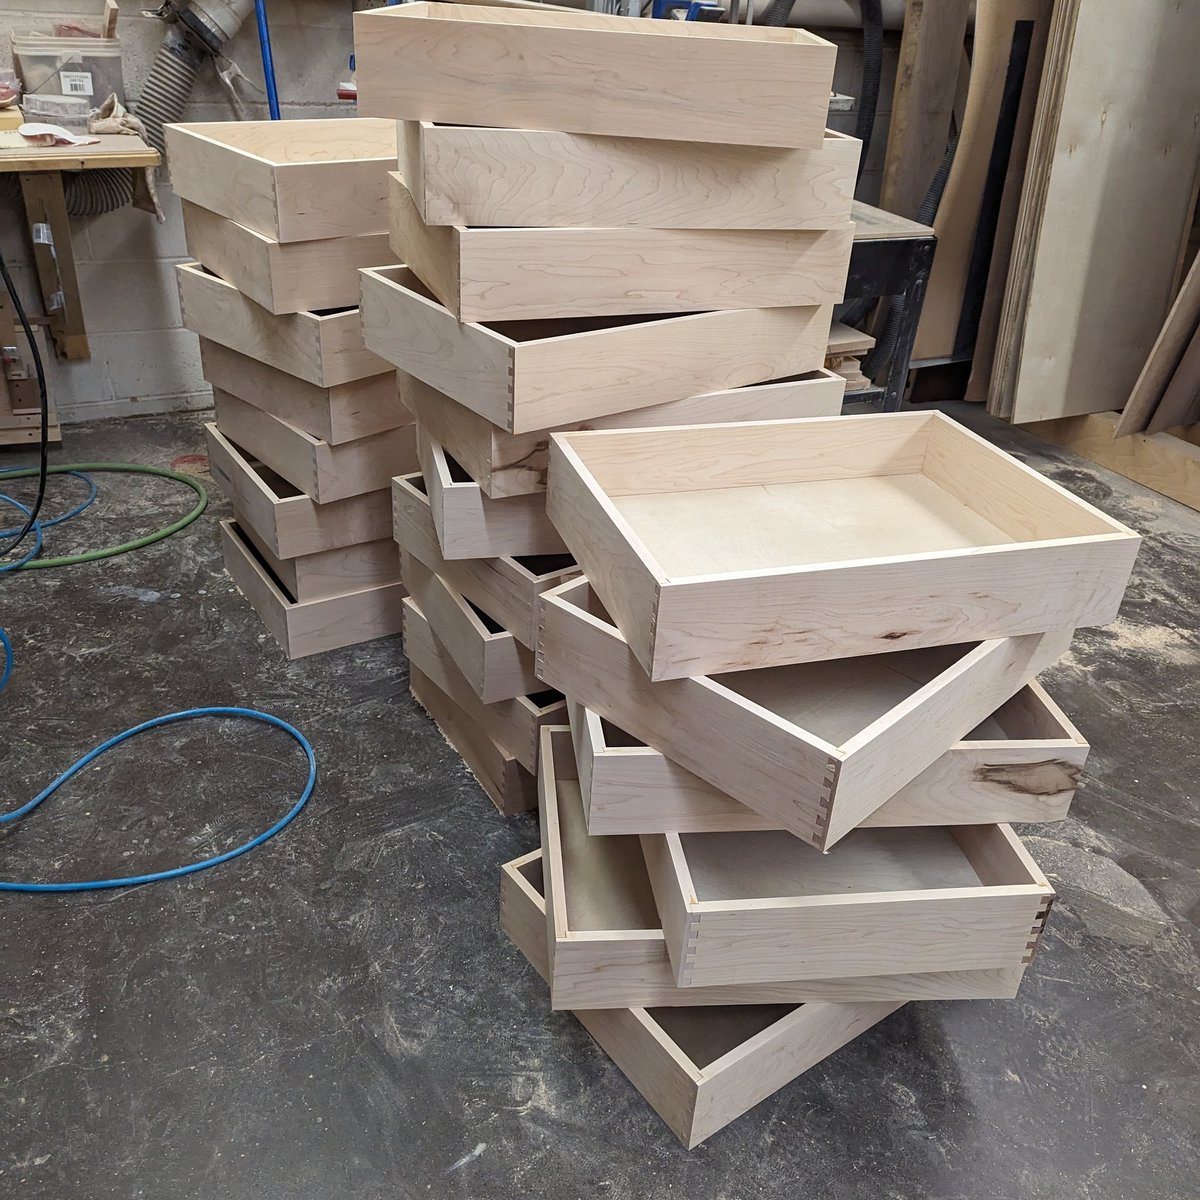 Just a few drawer boxes getting ready for lacquer 
#customcabinetry